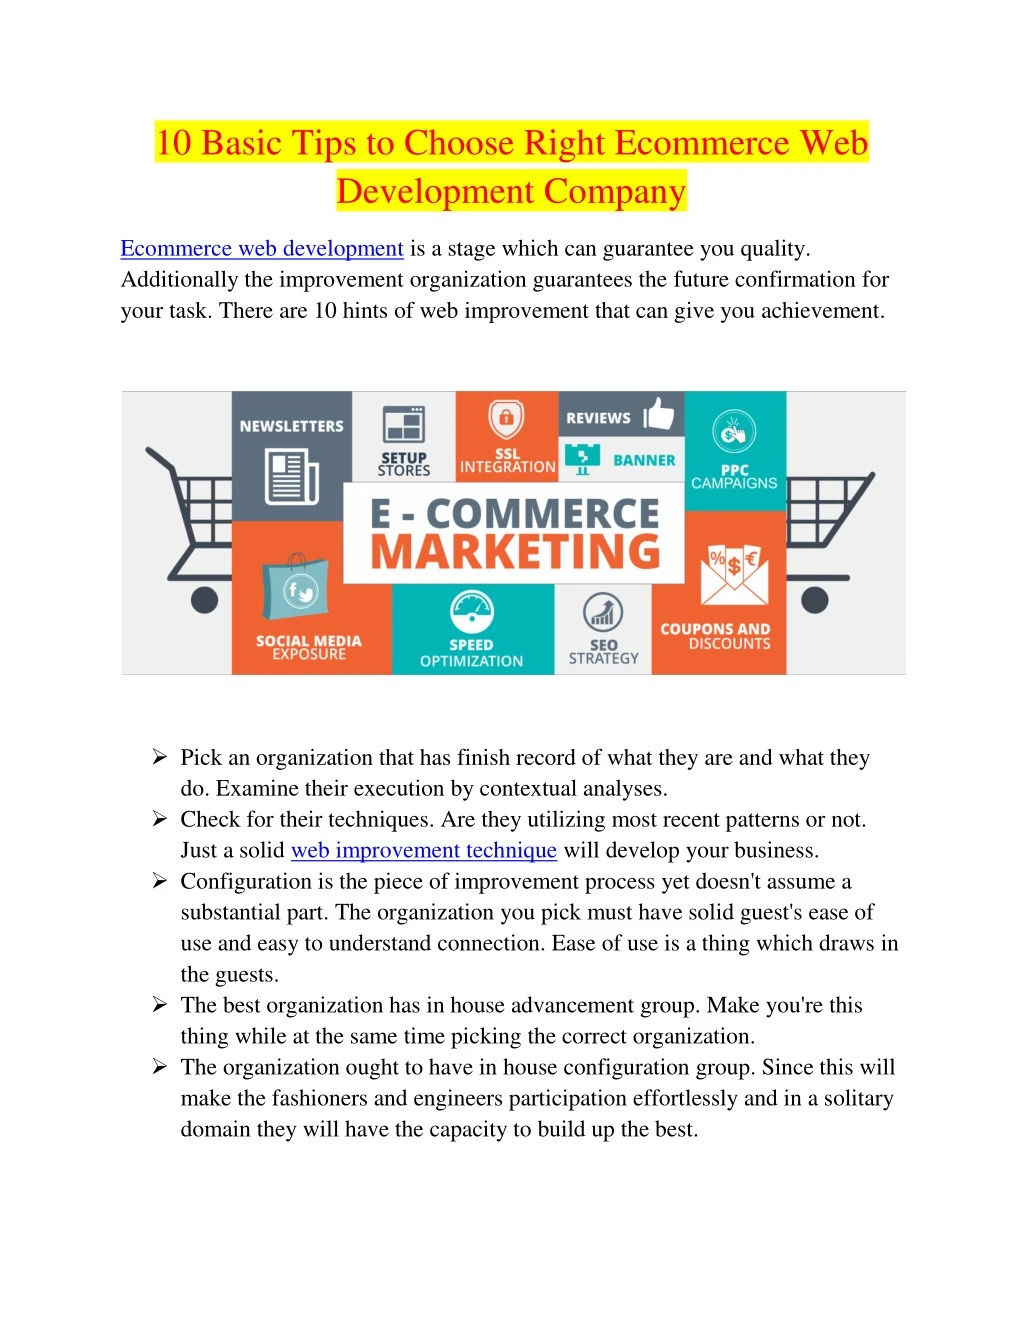 10 basic tips to choose right ecommerce